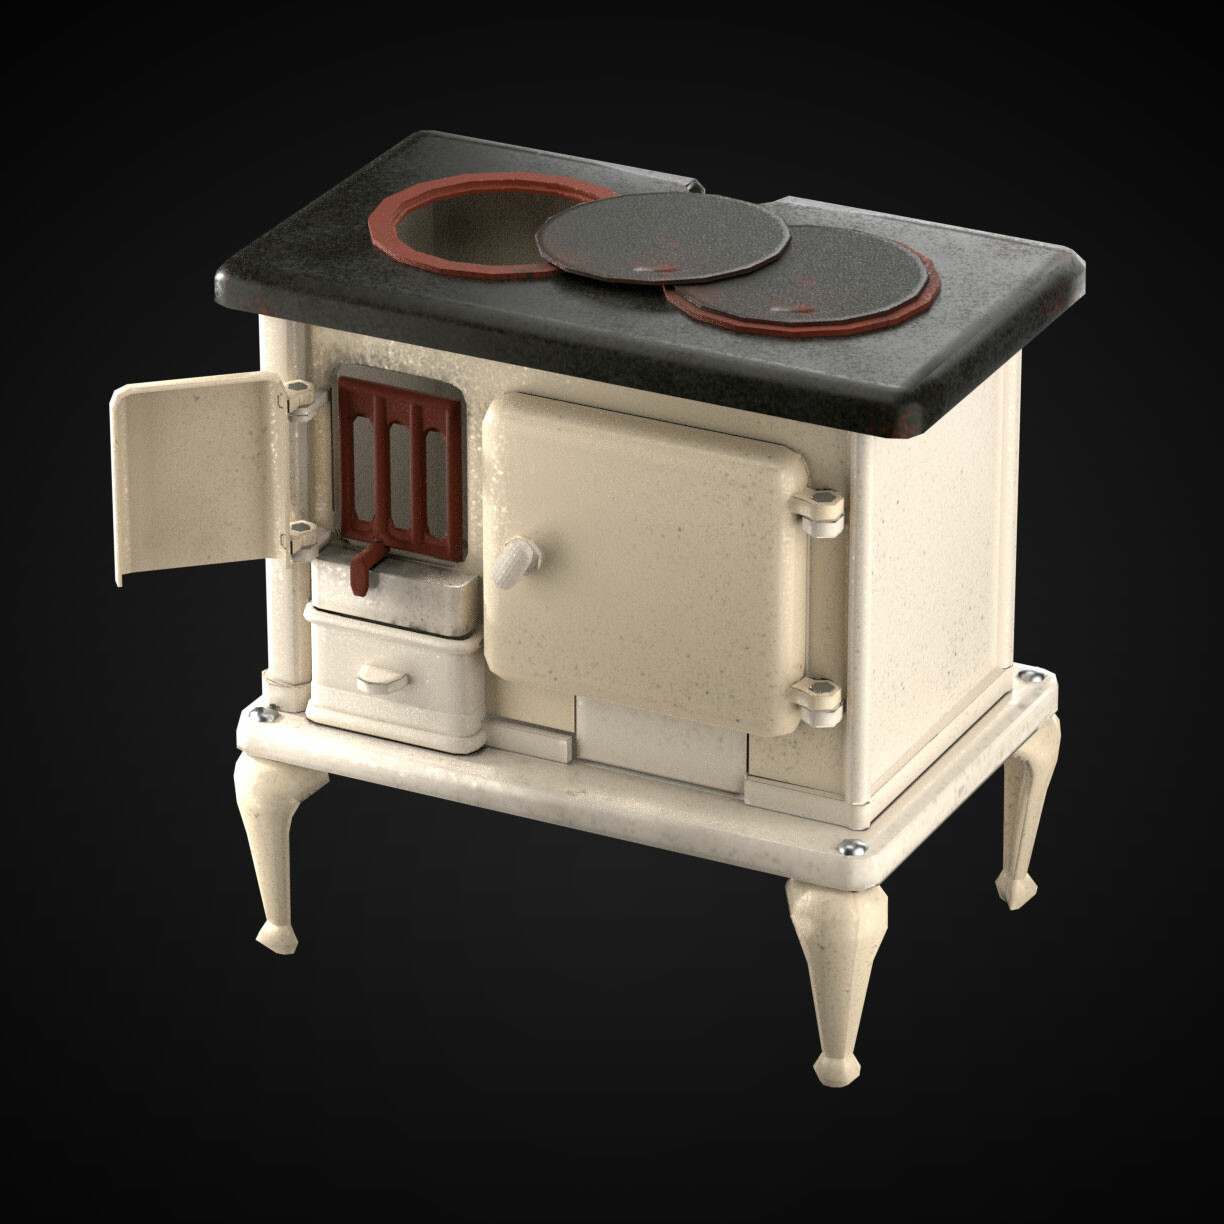 486,335 Stove Images, Stock Photos, 3D objects, & Vectors